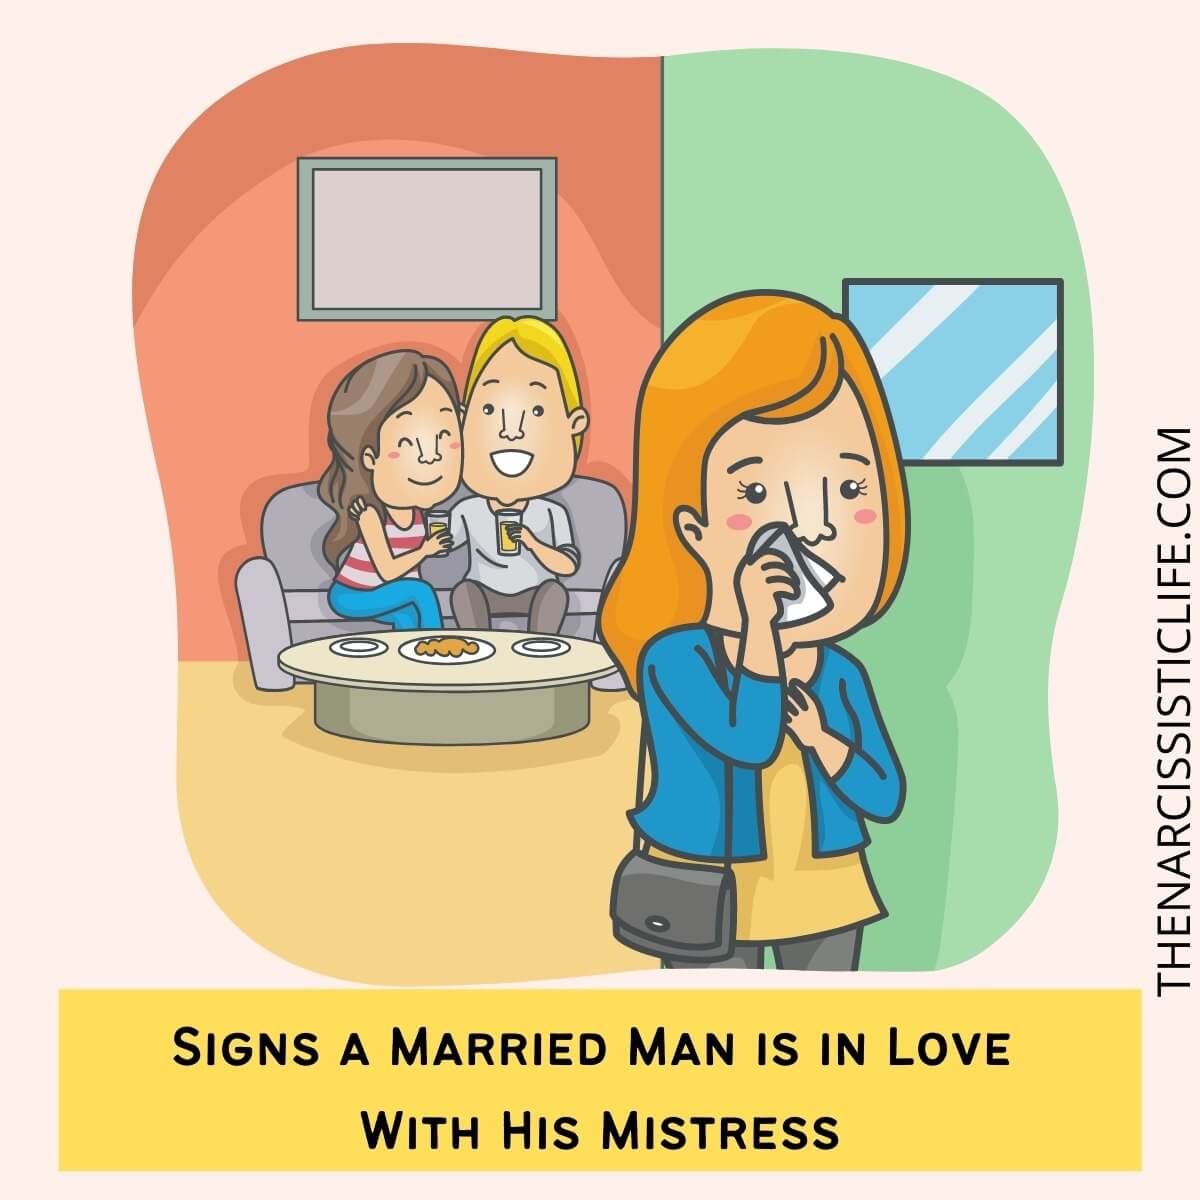 Do Married Men Miss Their Mistresses?